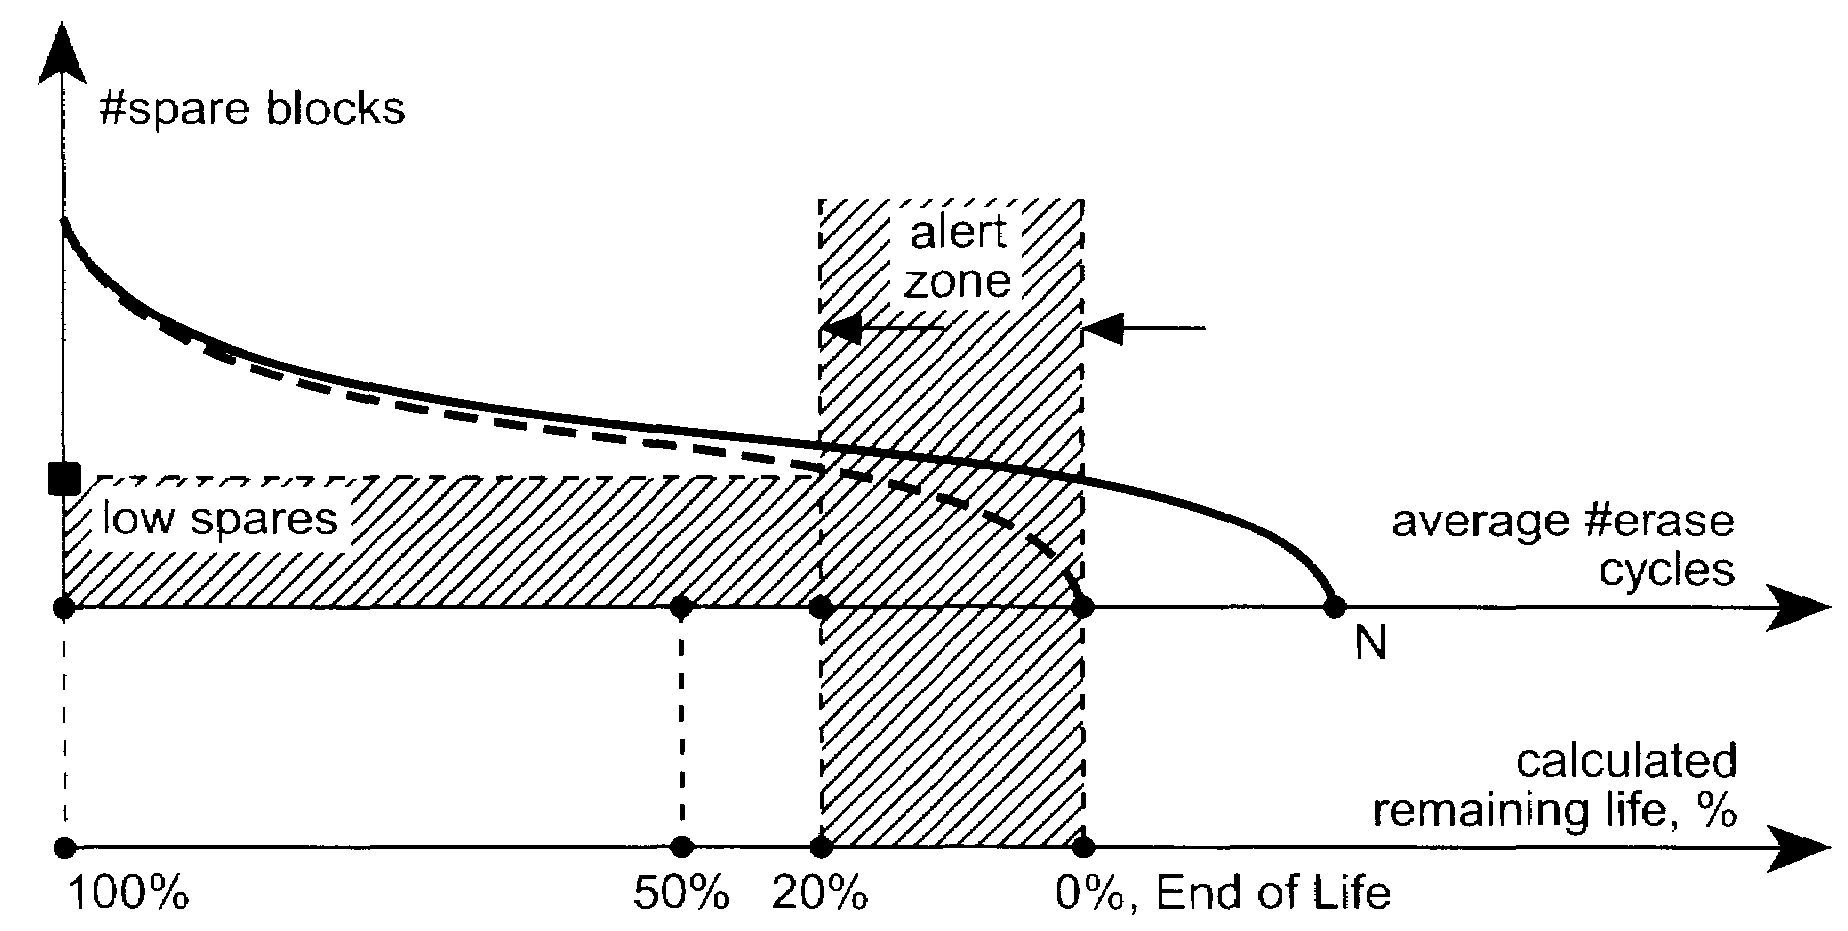 Methods of end of life calculation for non-volatile memories